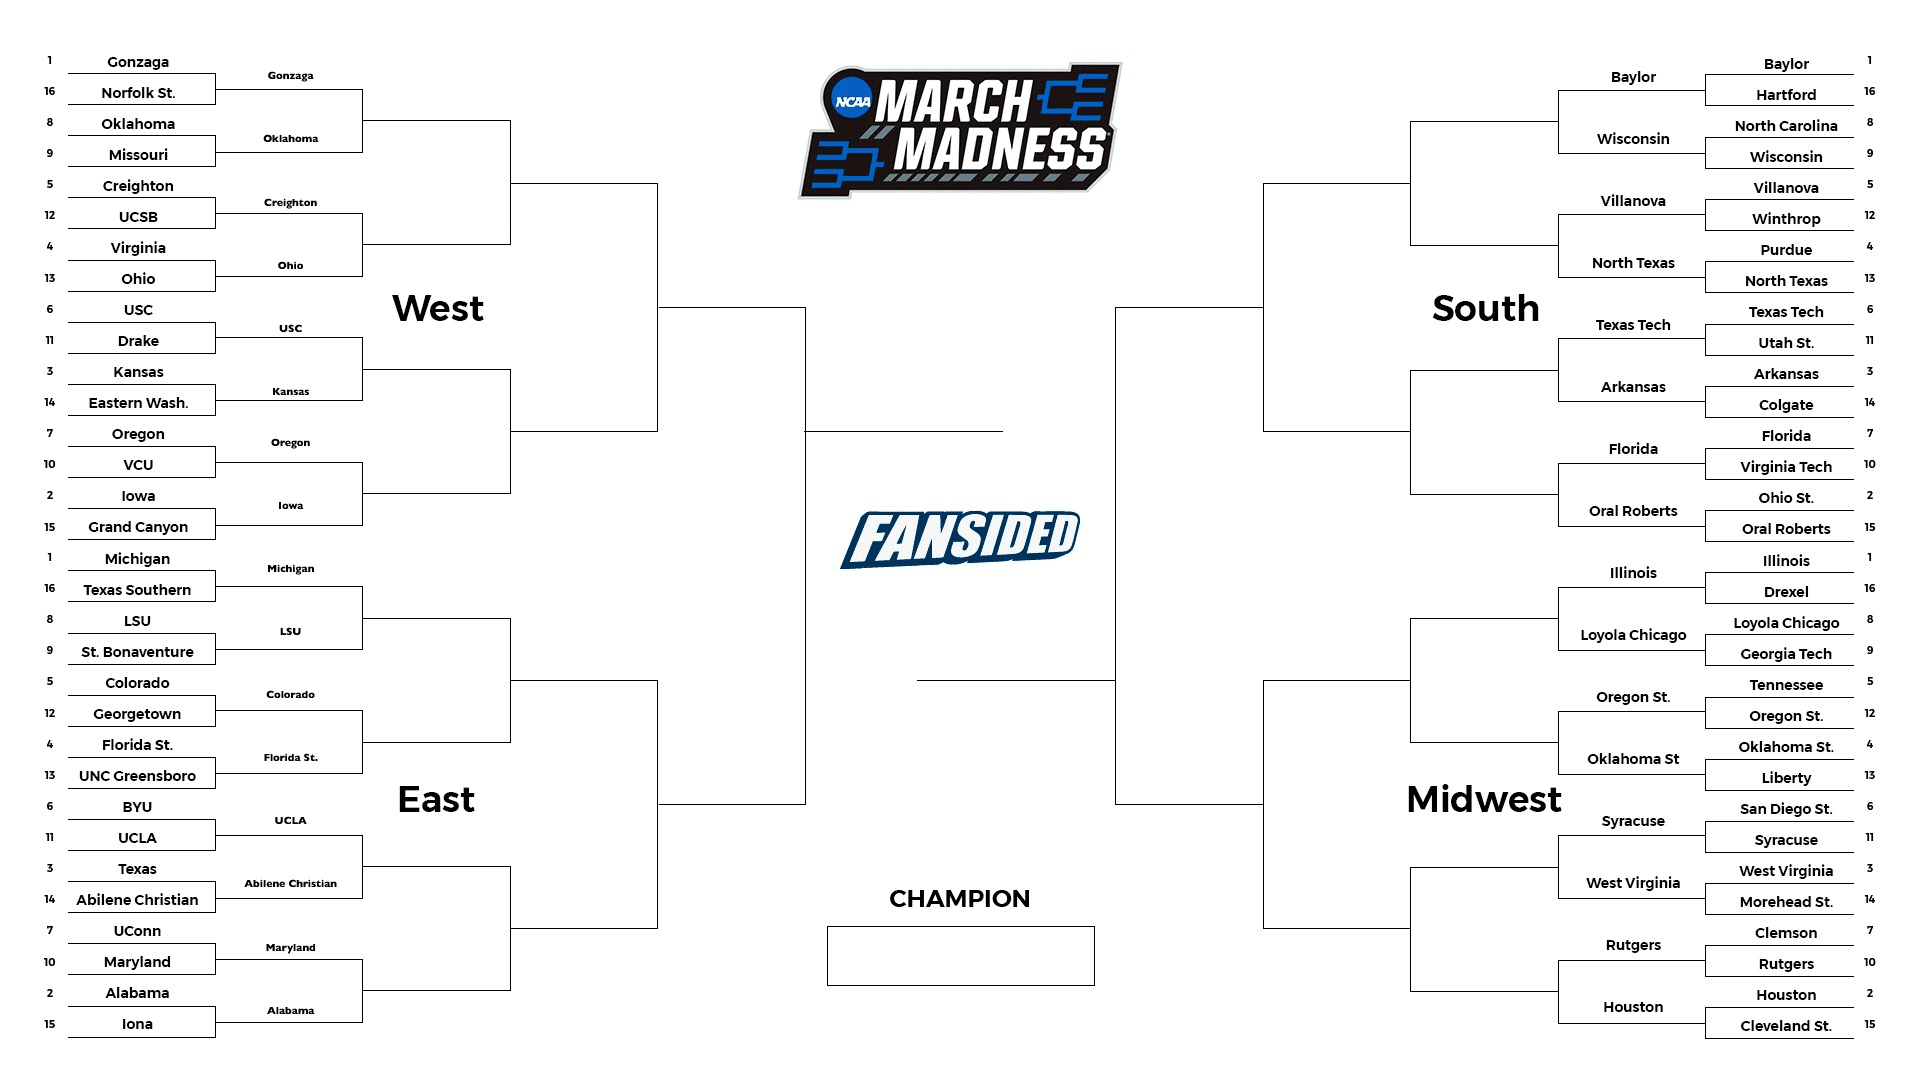 Updated March Madness bracket after Round of 64